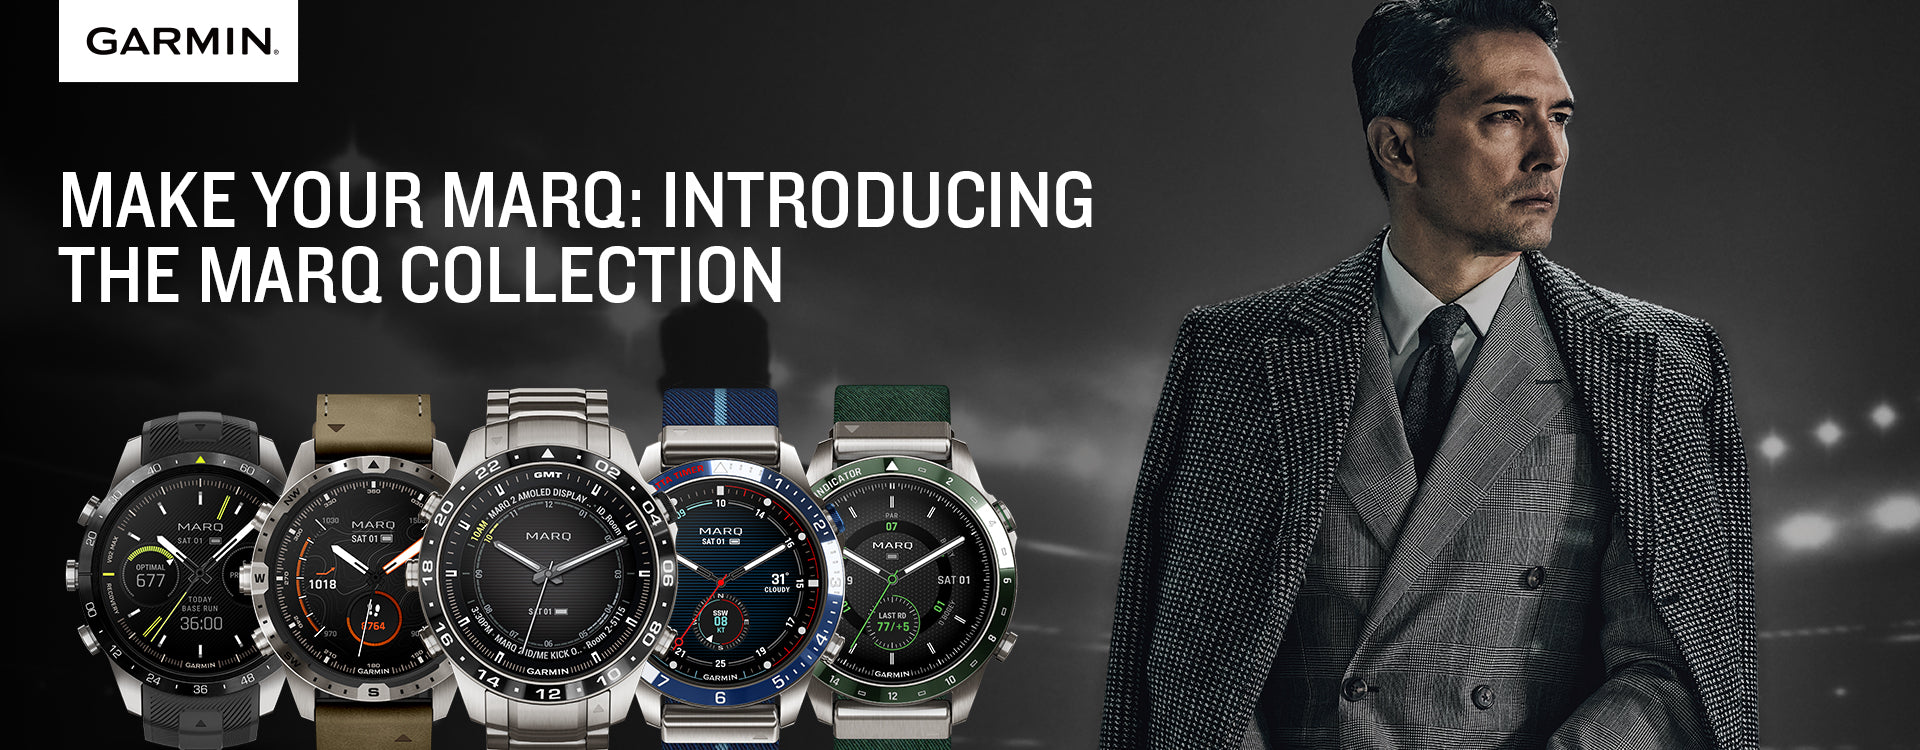 Make Your MARQ: Introducing the MARQ collection